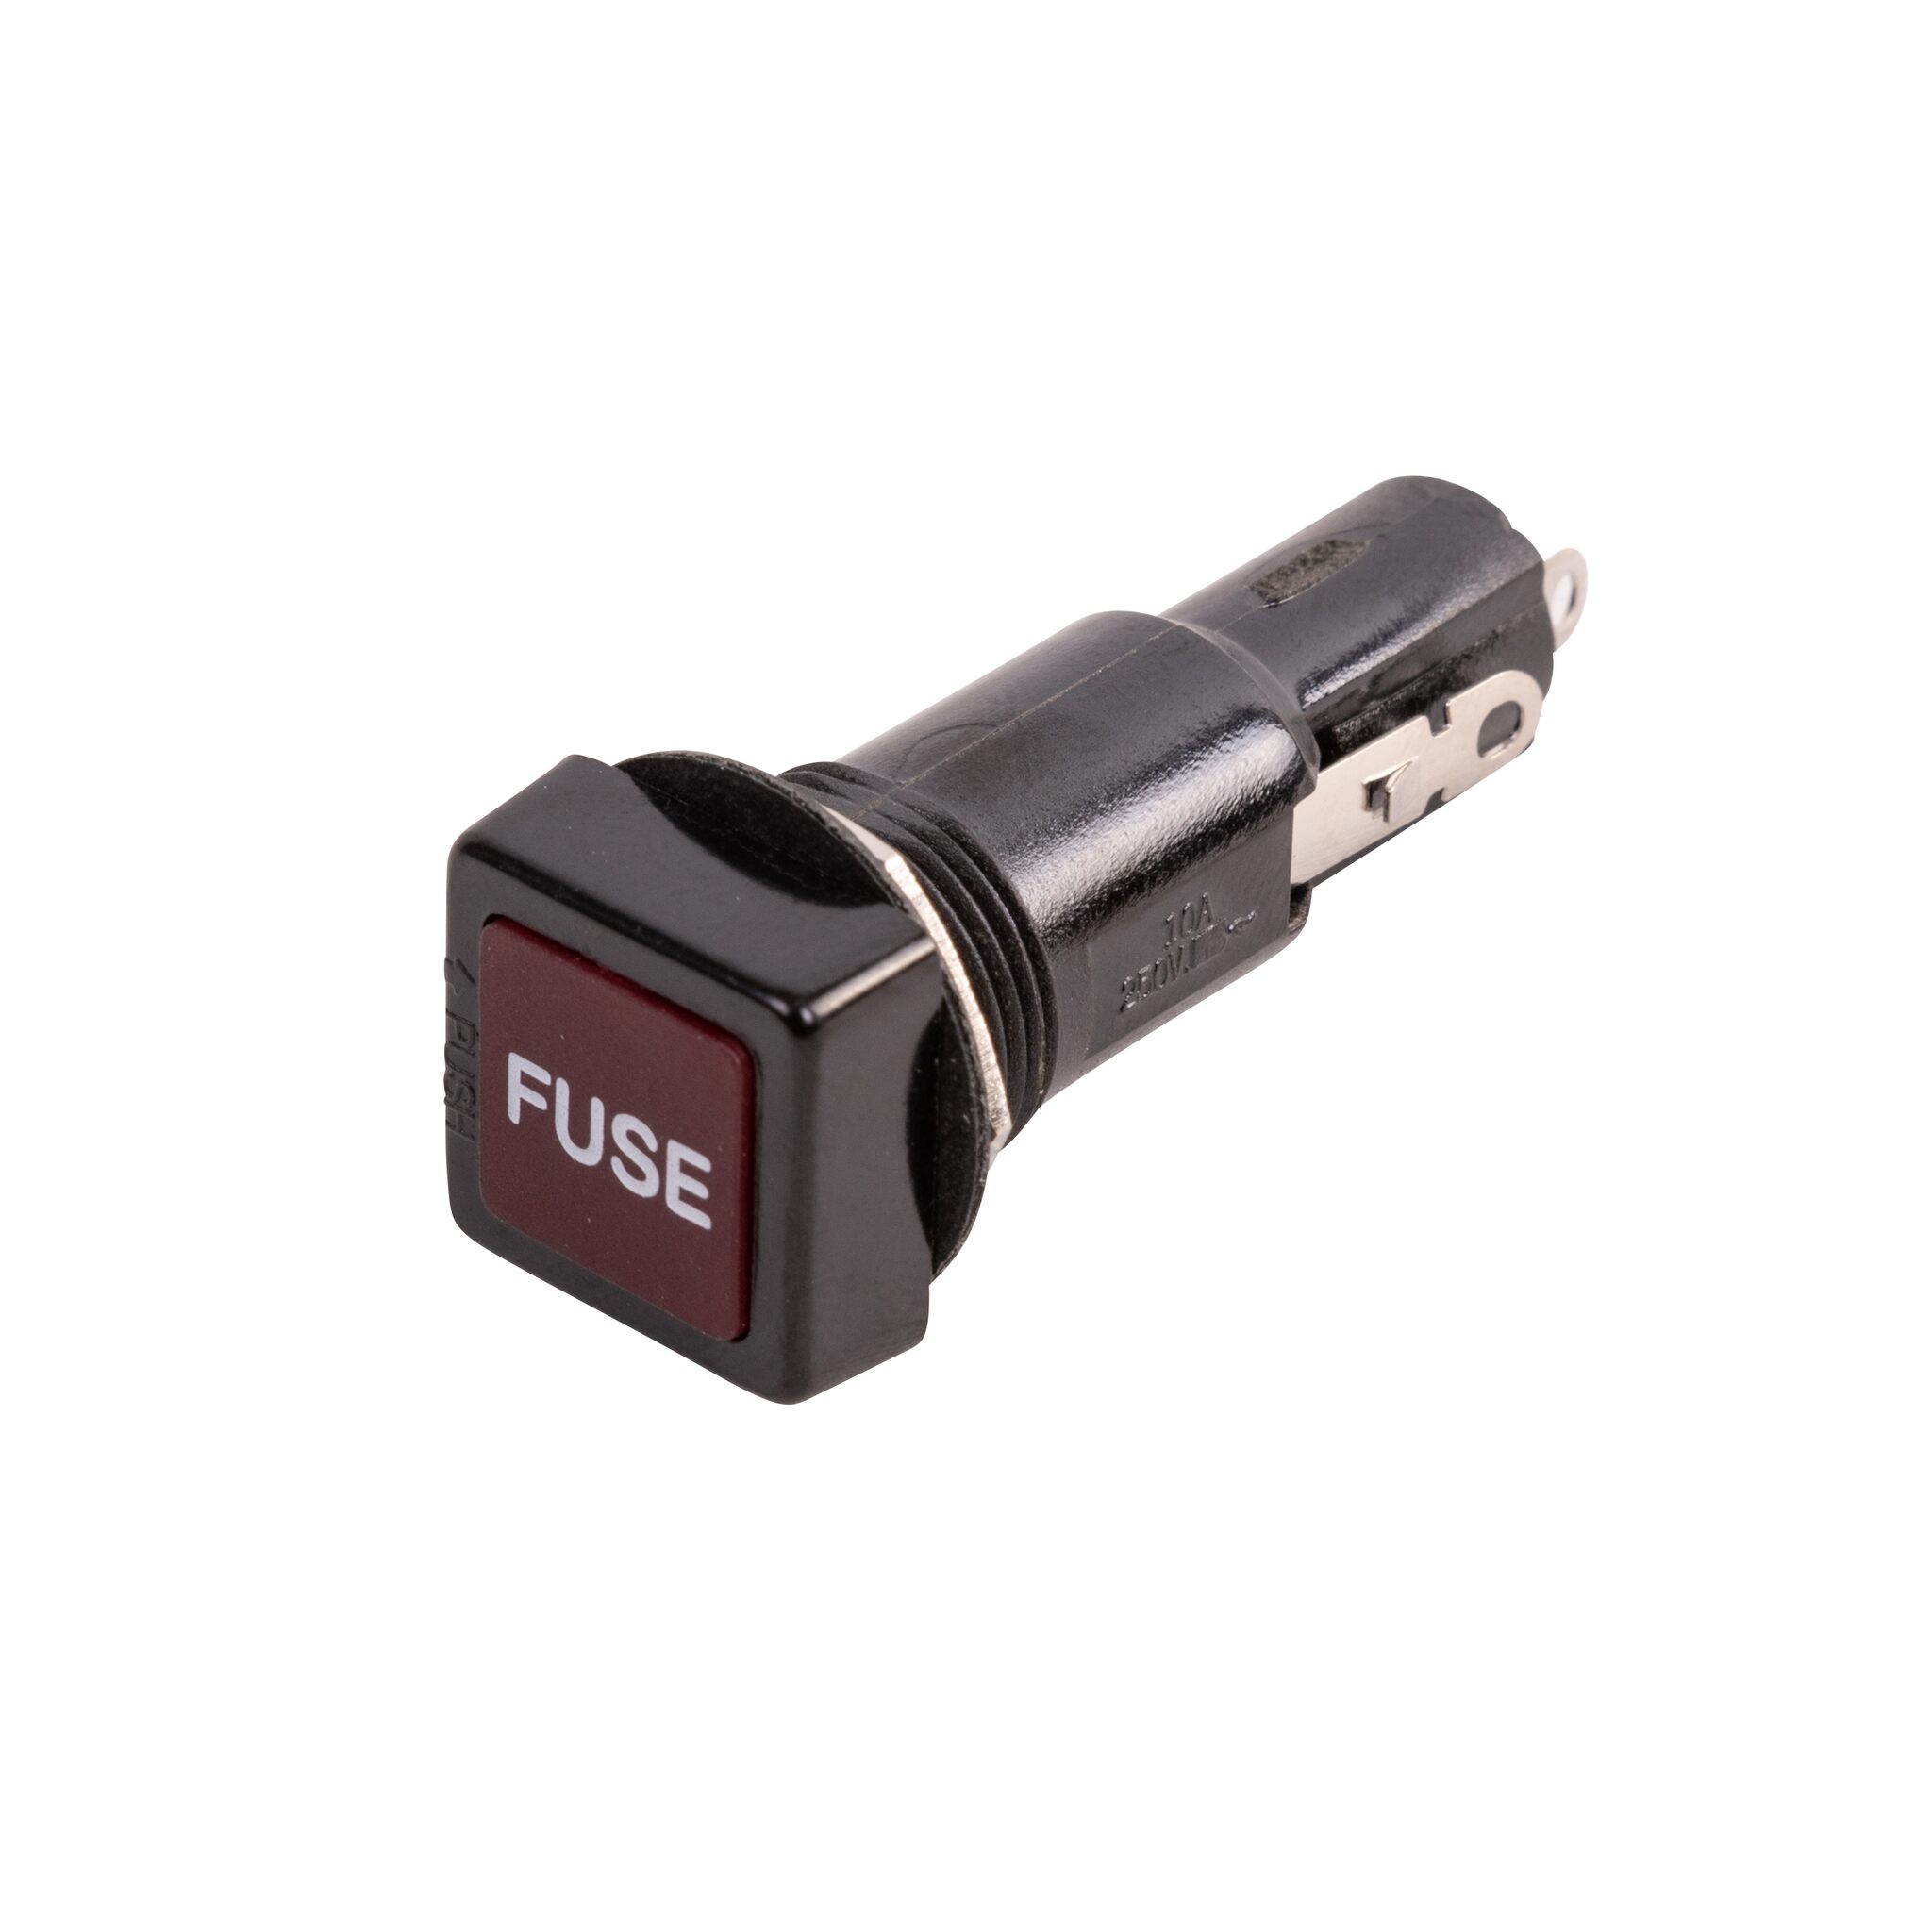 Fuse holder for control panel